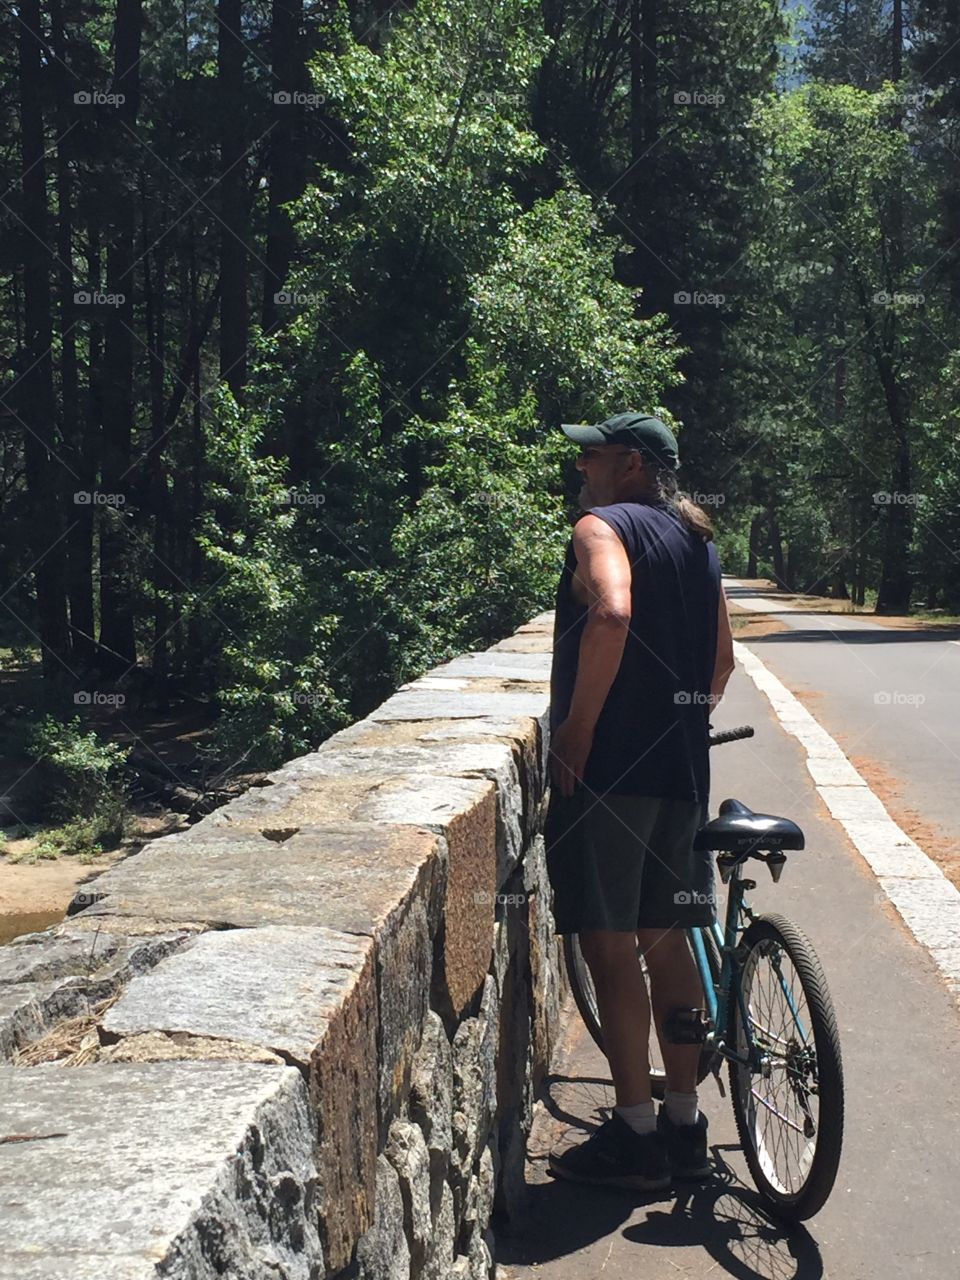 Me and my Bike. Riding trails in Yosemite National Park 